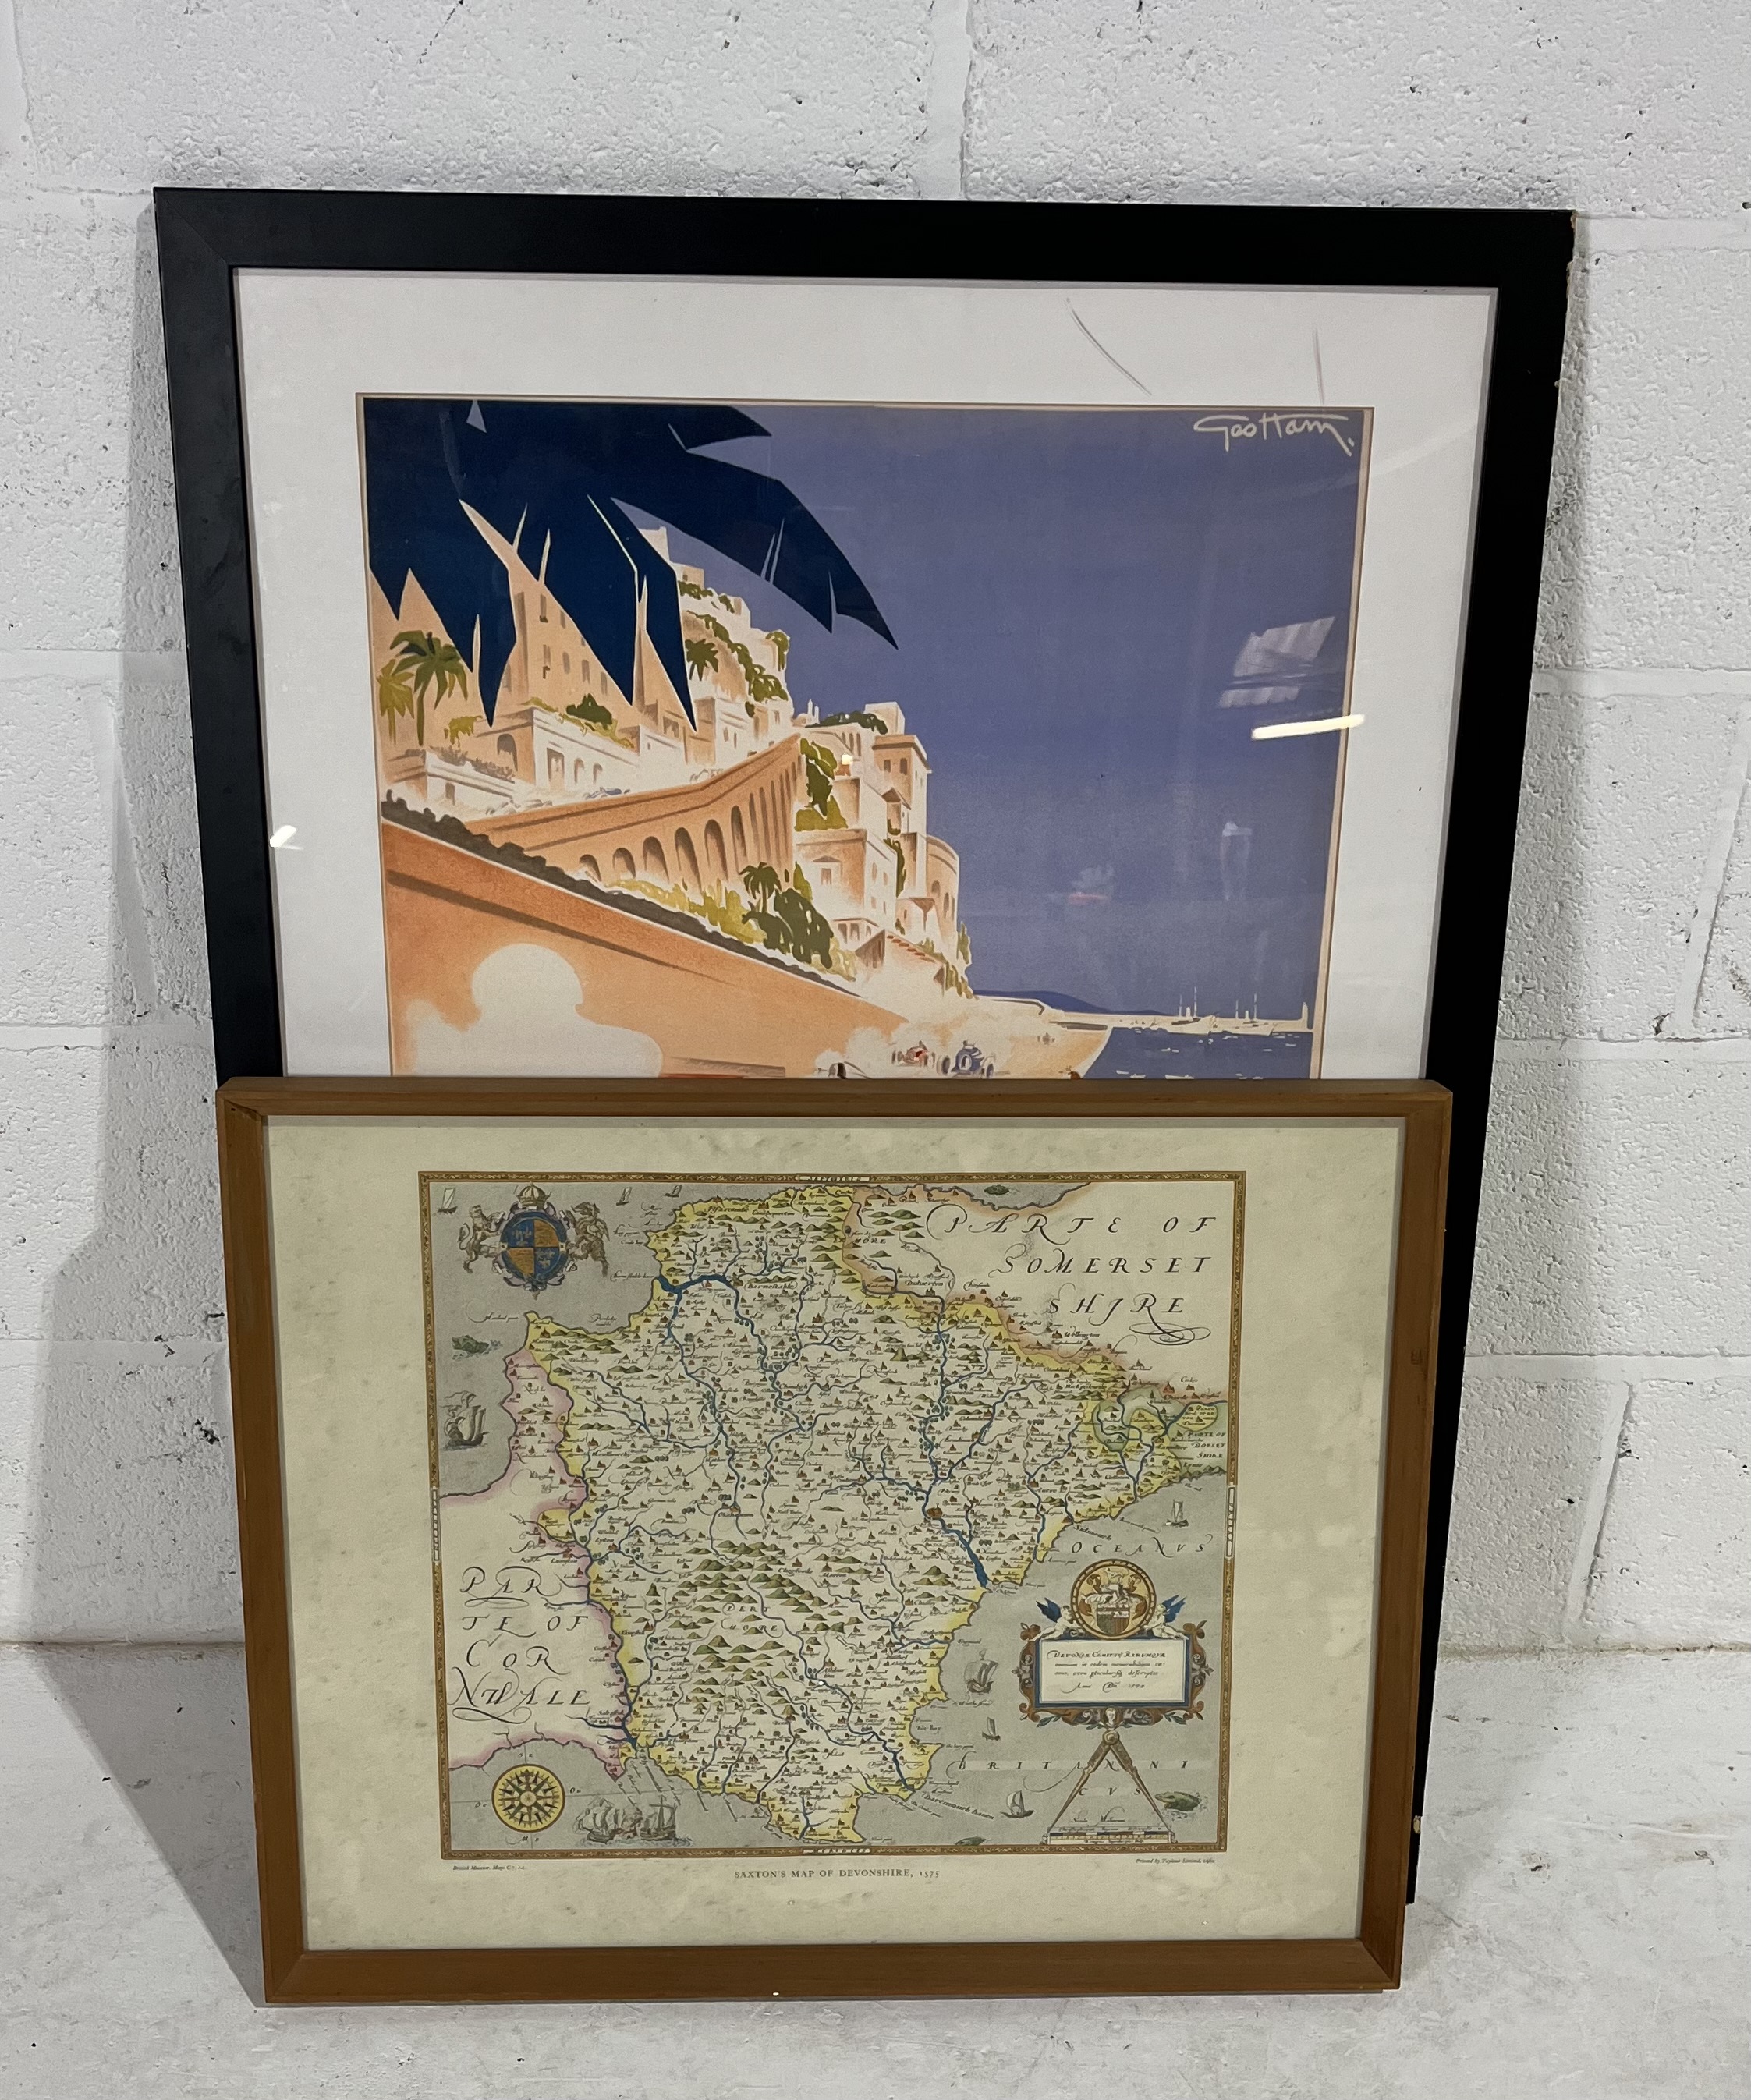 A framed Monaco 1937 dated racing poster, and a framed Devonshire map by Saxtons 1575.